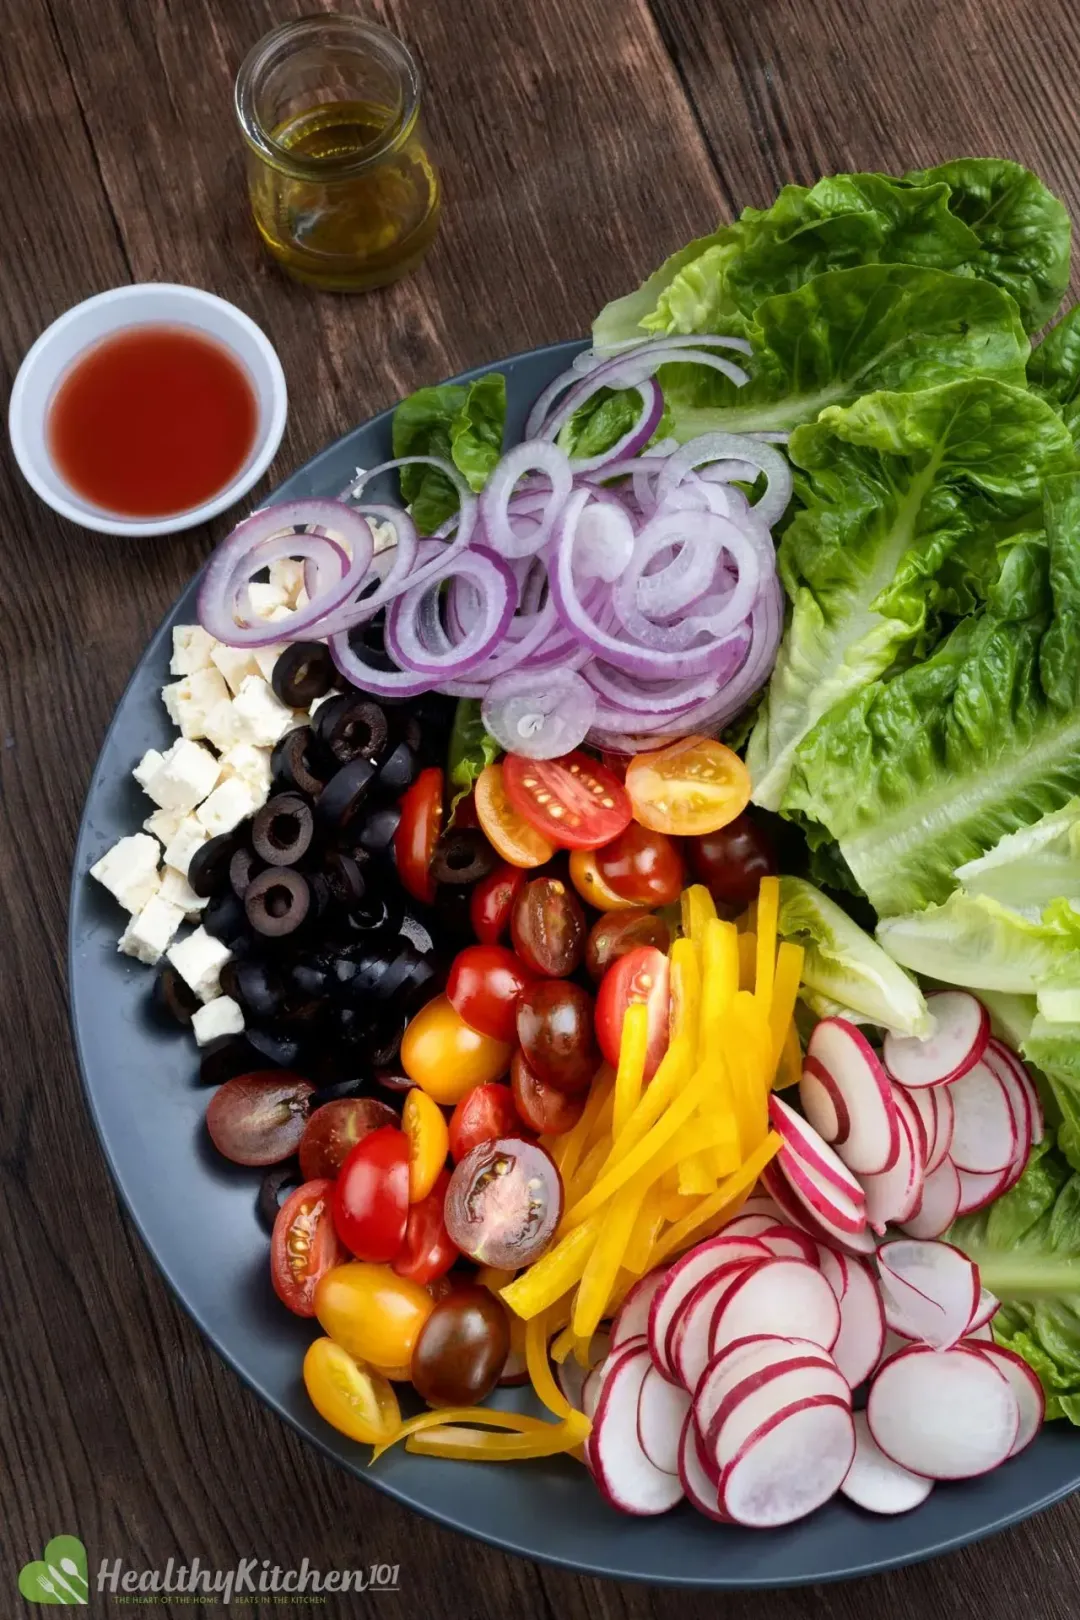 A large plate holding halved cherry tomatoes, sliced yellow peppers, slice radish, lettuce, olives, cubed feta, and lettuce